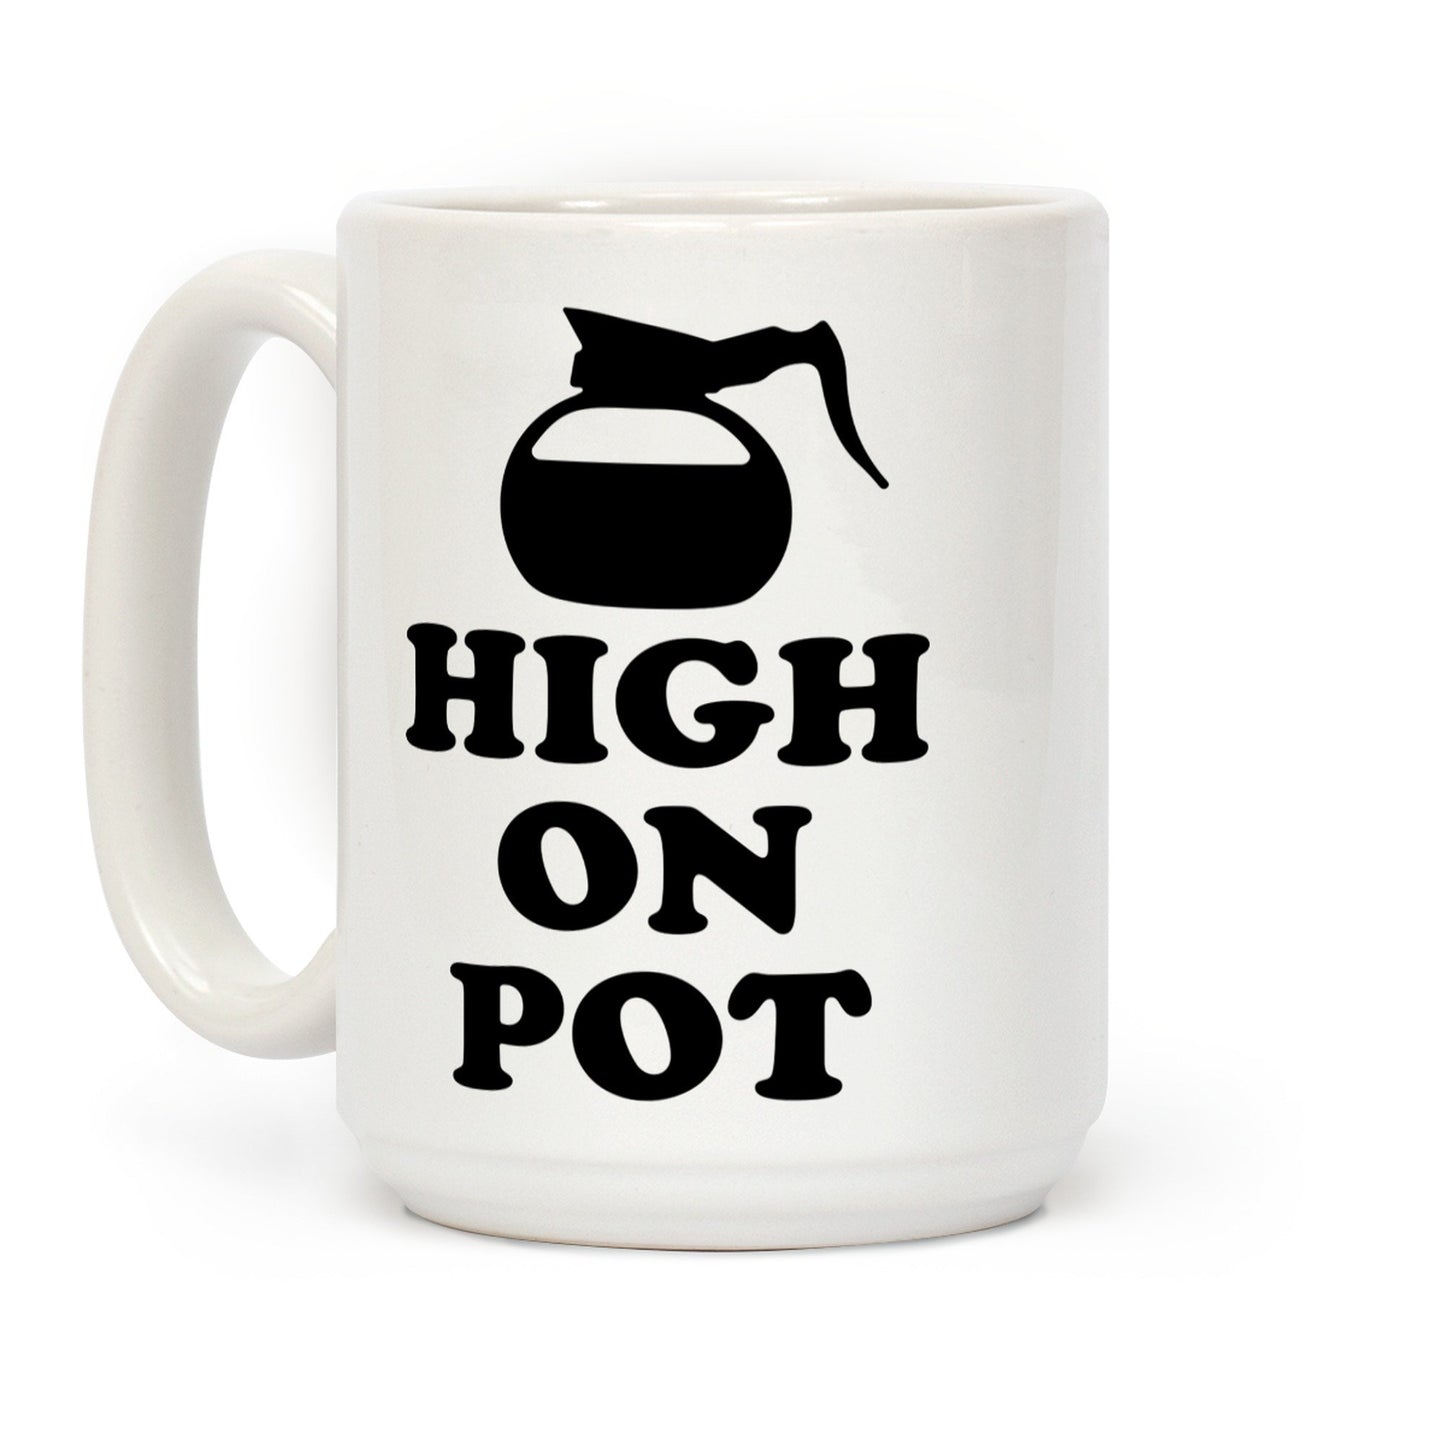 High On Pot Ceramic Coffee Mug by LookHUMAN Flower Power Packages 15 Ounce 